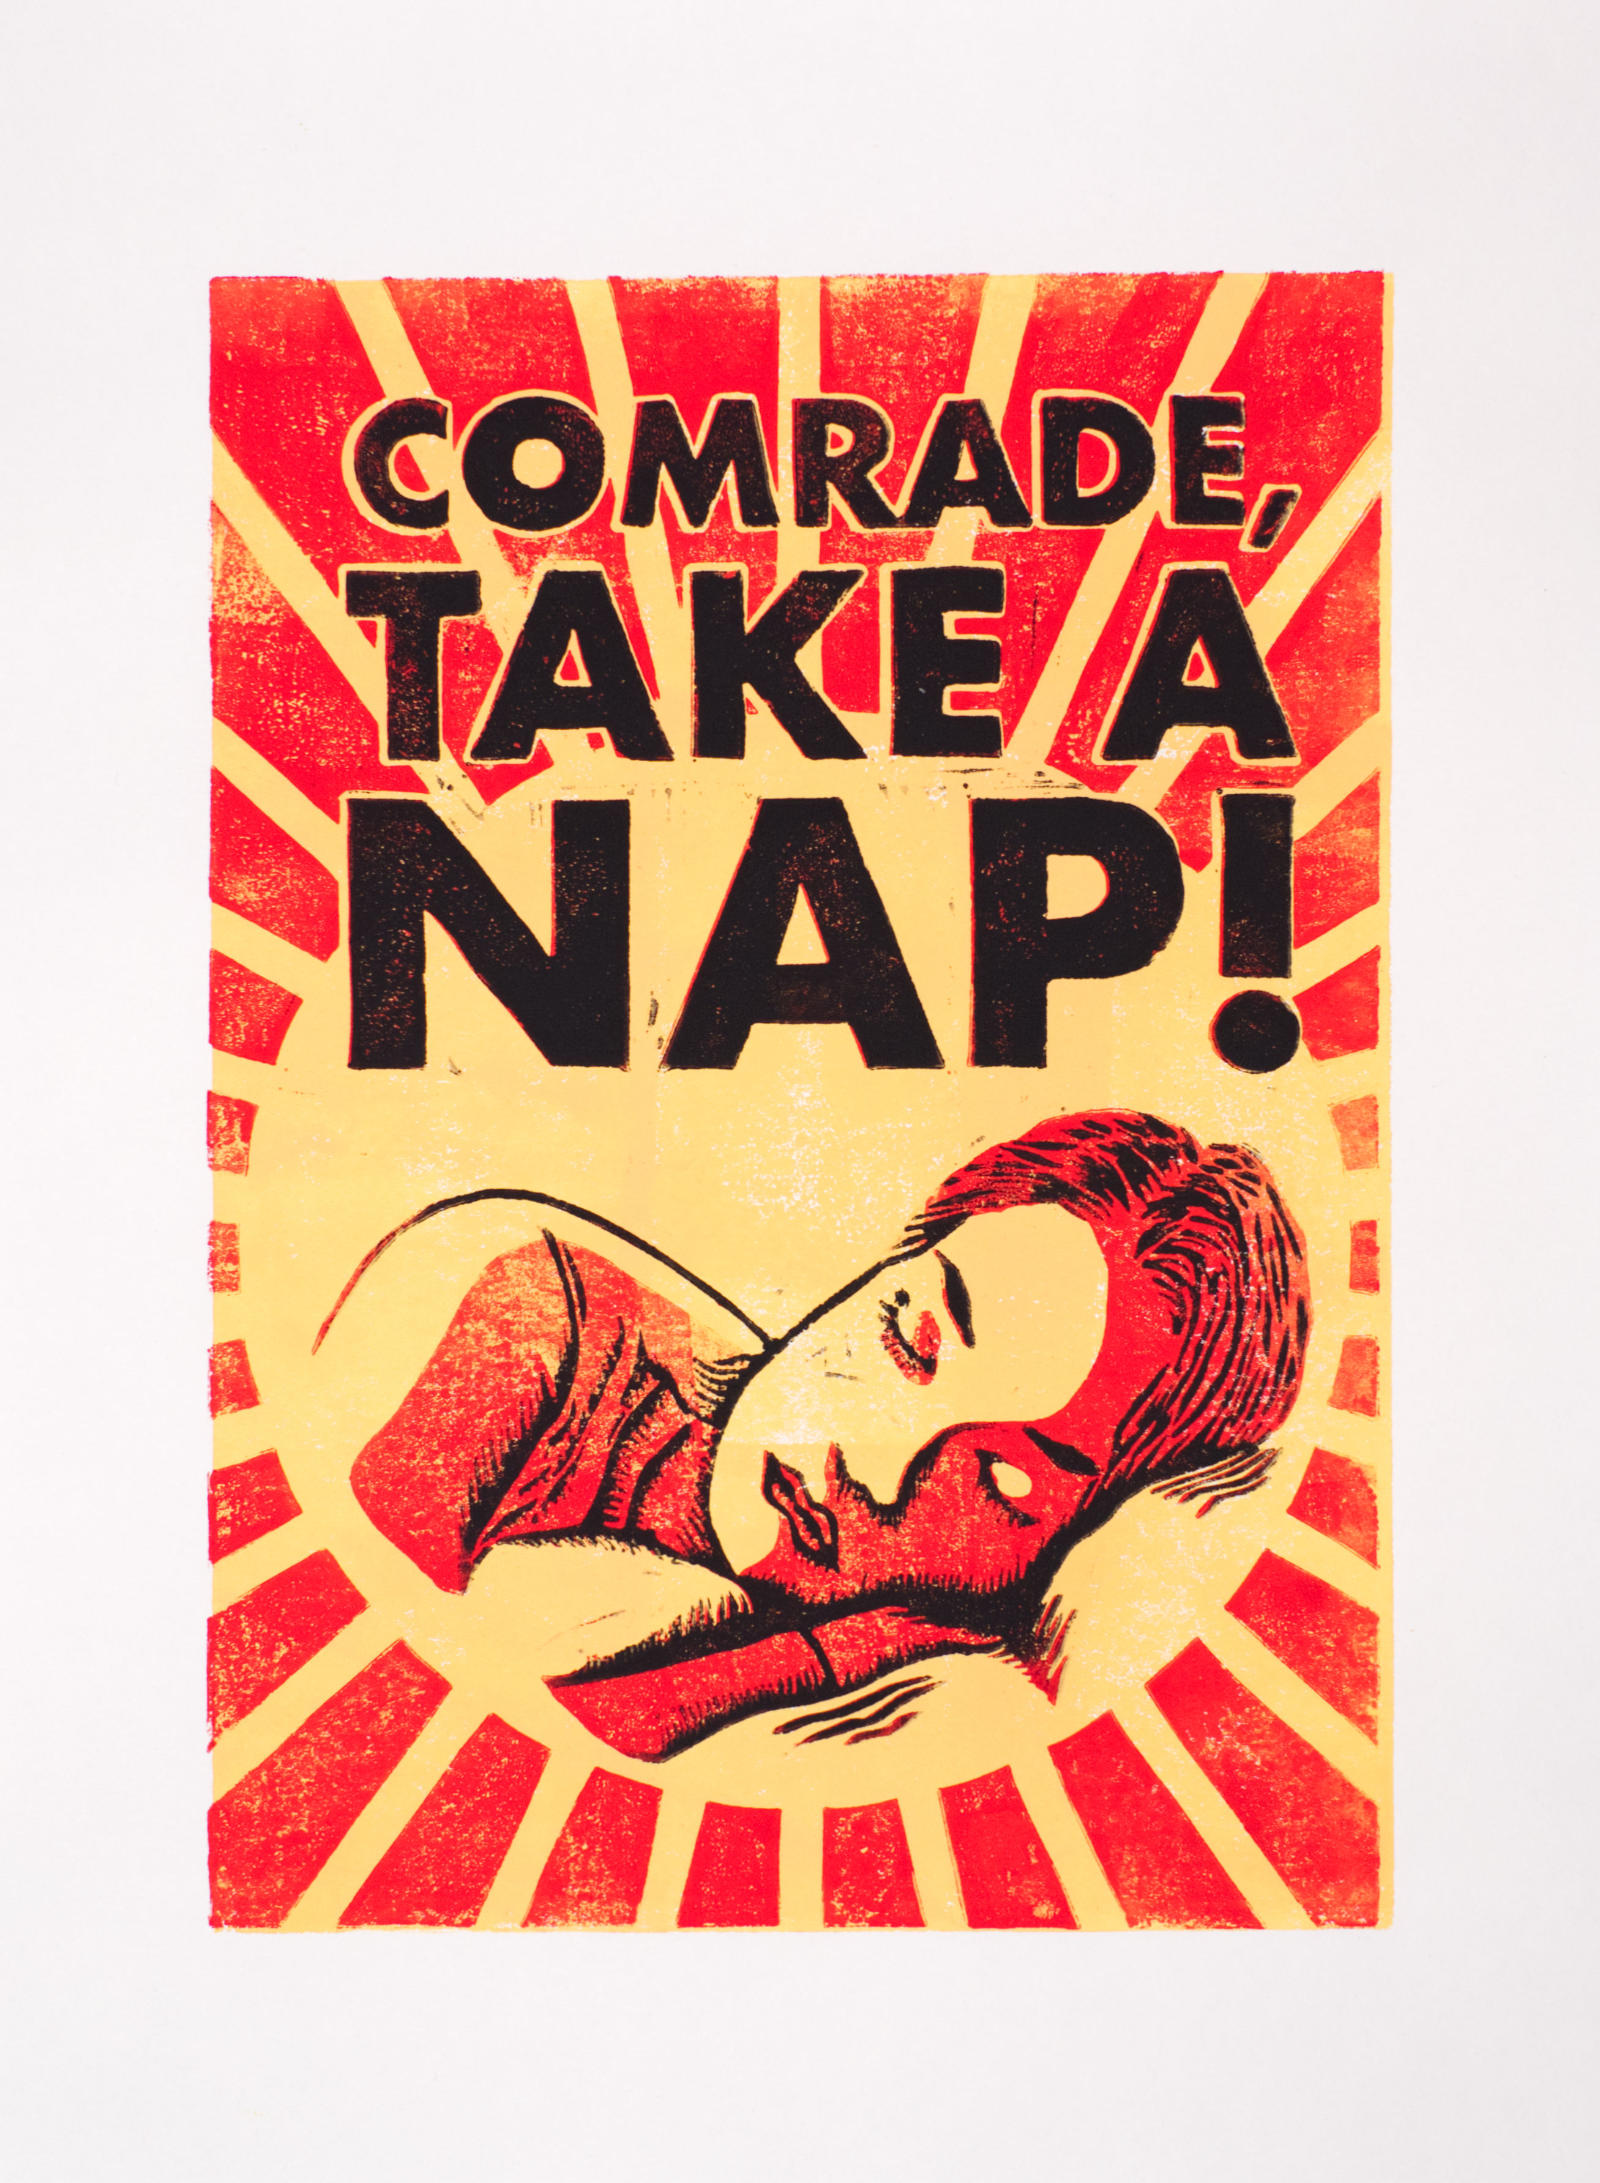 Multi-color linocut print (yellow, red, black) of a sleeping woman's face in style of soviet era propaganda posters with capital letter caption: "COMRADE, TAKE A NAP!"